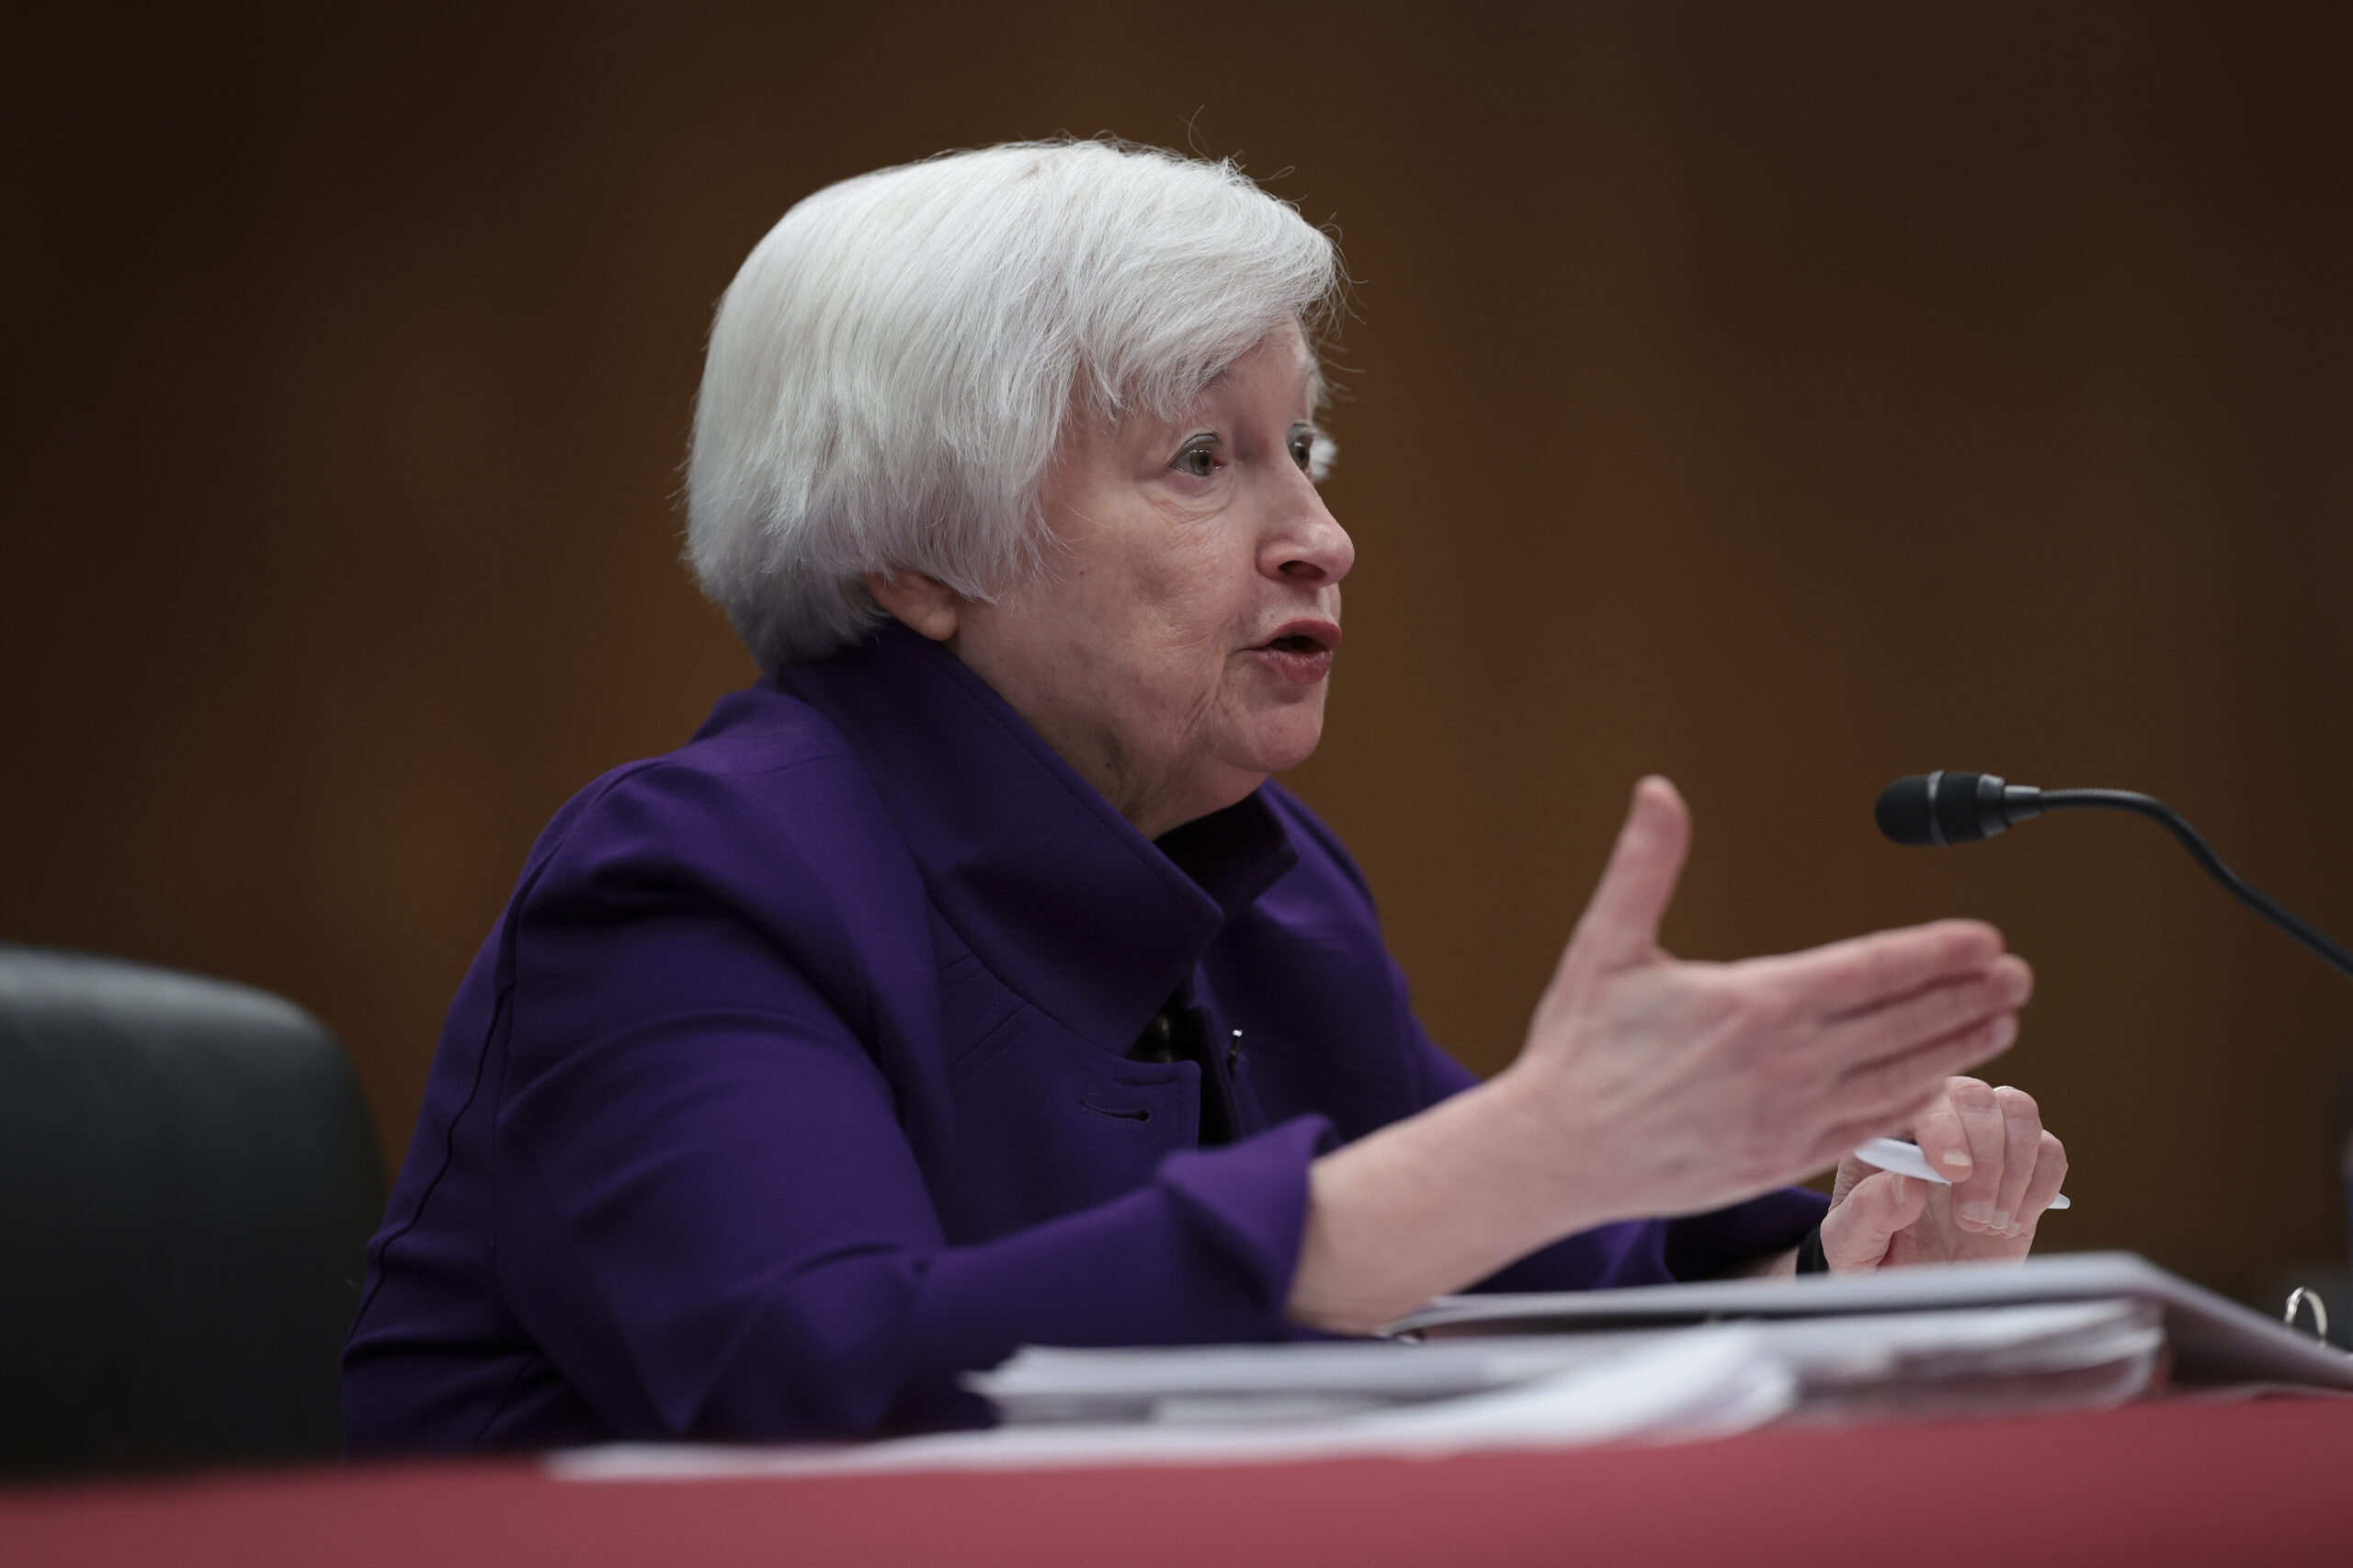 Yellen Walks Back Implicit Support For Large Bank Account Holders, Prompts Investor Unease